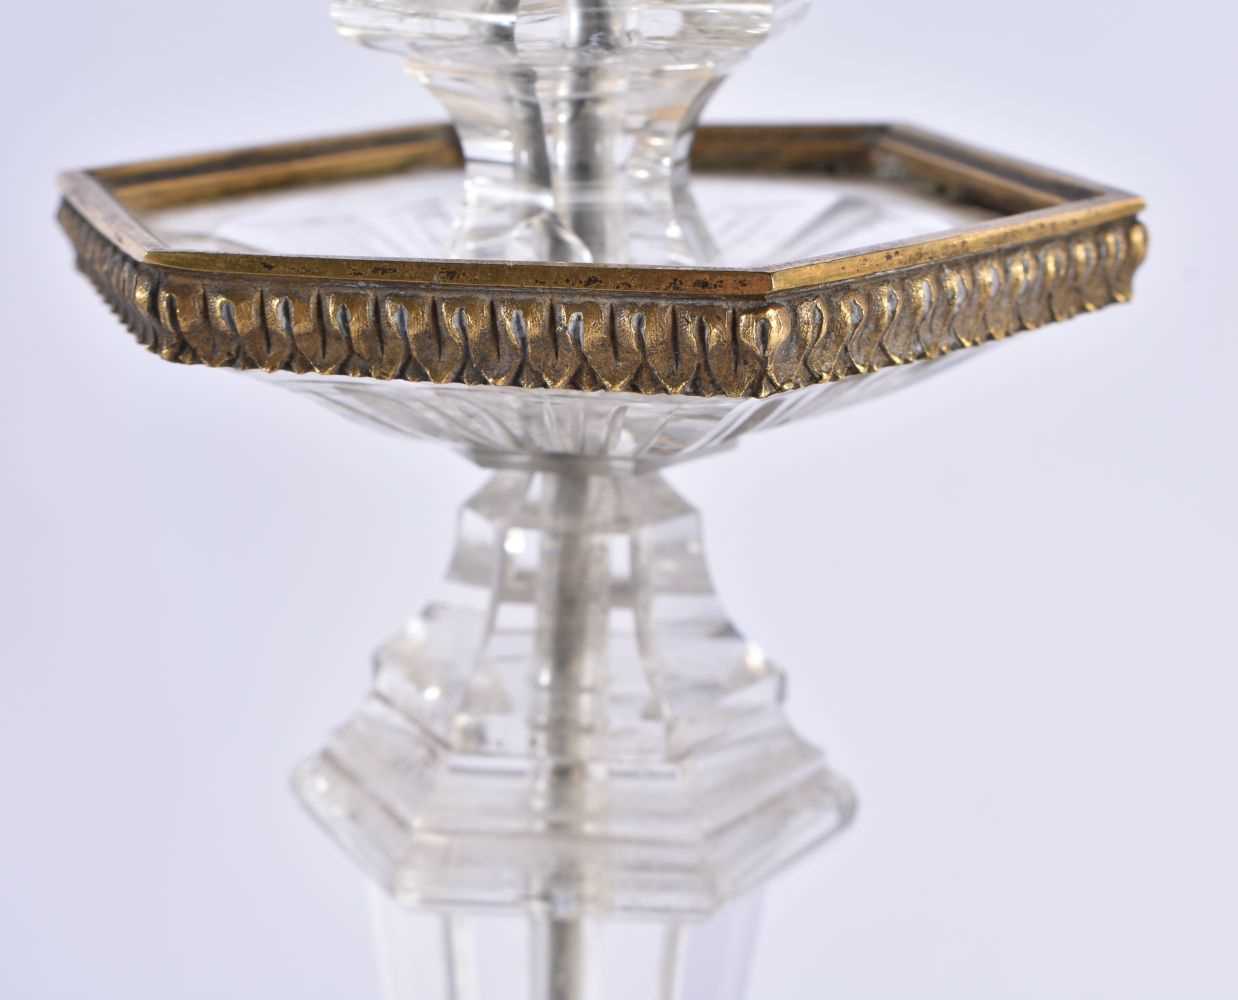 A FINE PAIR OF EARLY 19TH CENTURY CONTINENTAL BRONZE AND ROCK CRYSTAL CANDLESTICKS French of - Image 3 of 8